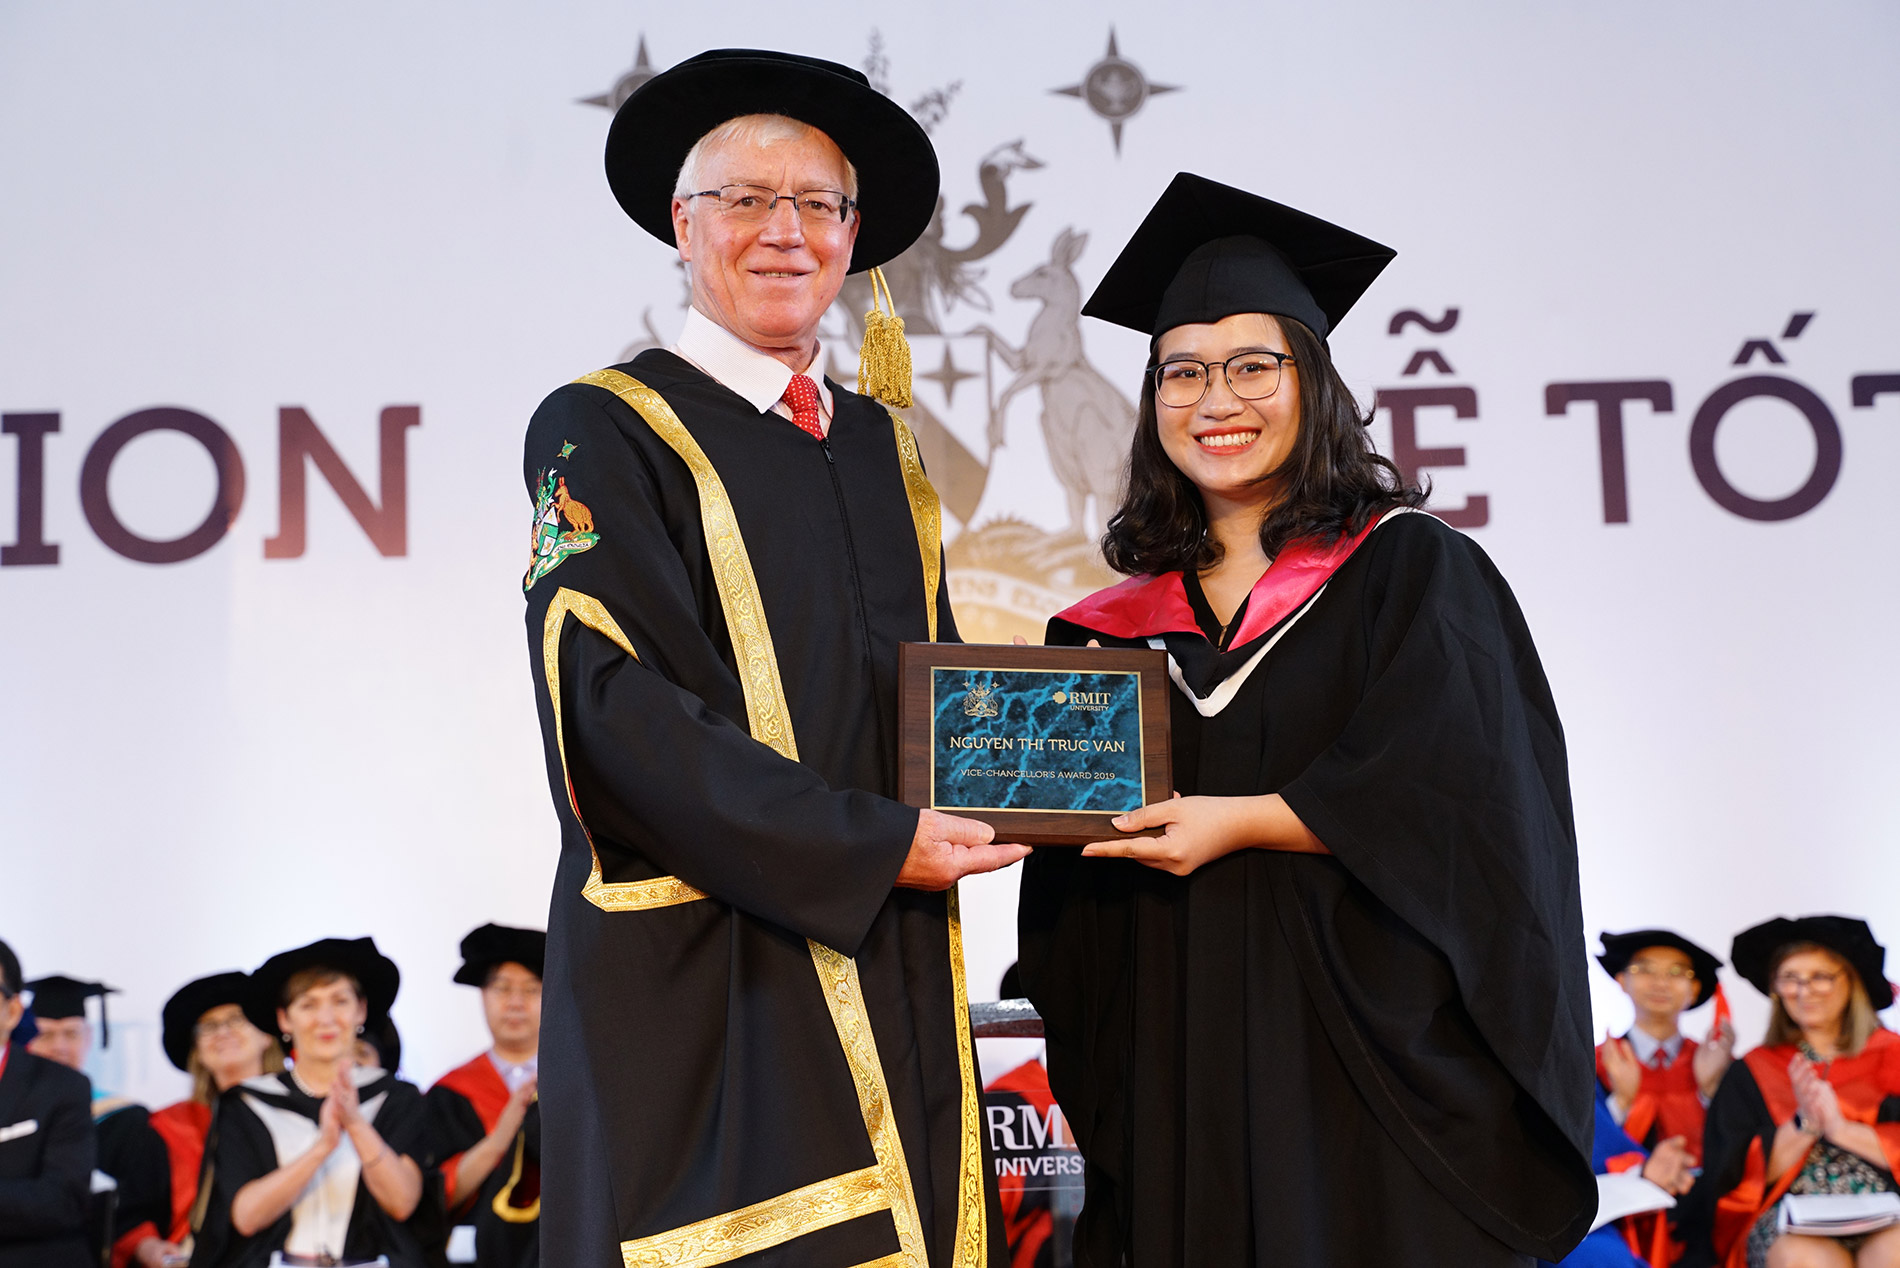 RMIT Vietnam Chairman Professor Peter Coloe presented the Vice-Chancellor’s Award for Saigon South campus to Nguyen Thi Truc Van. 